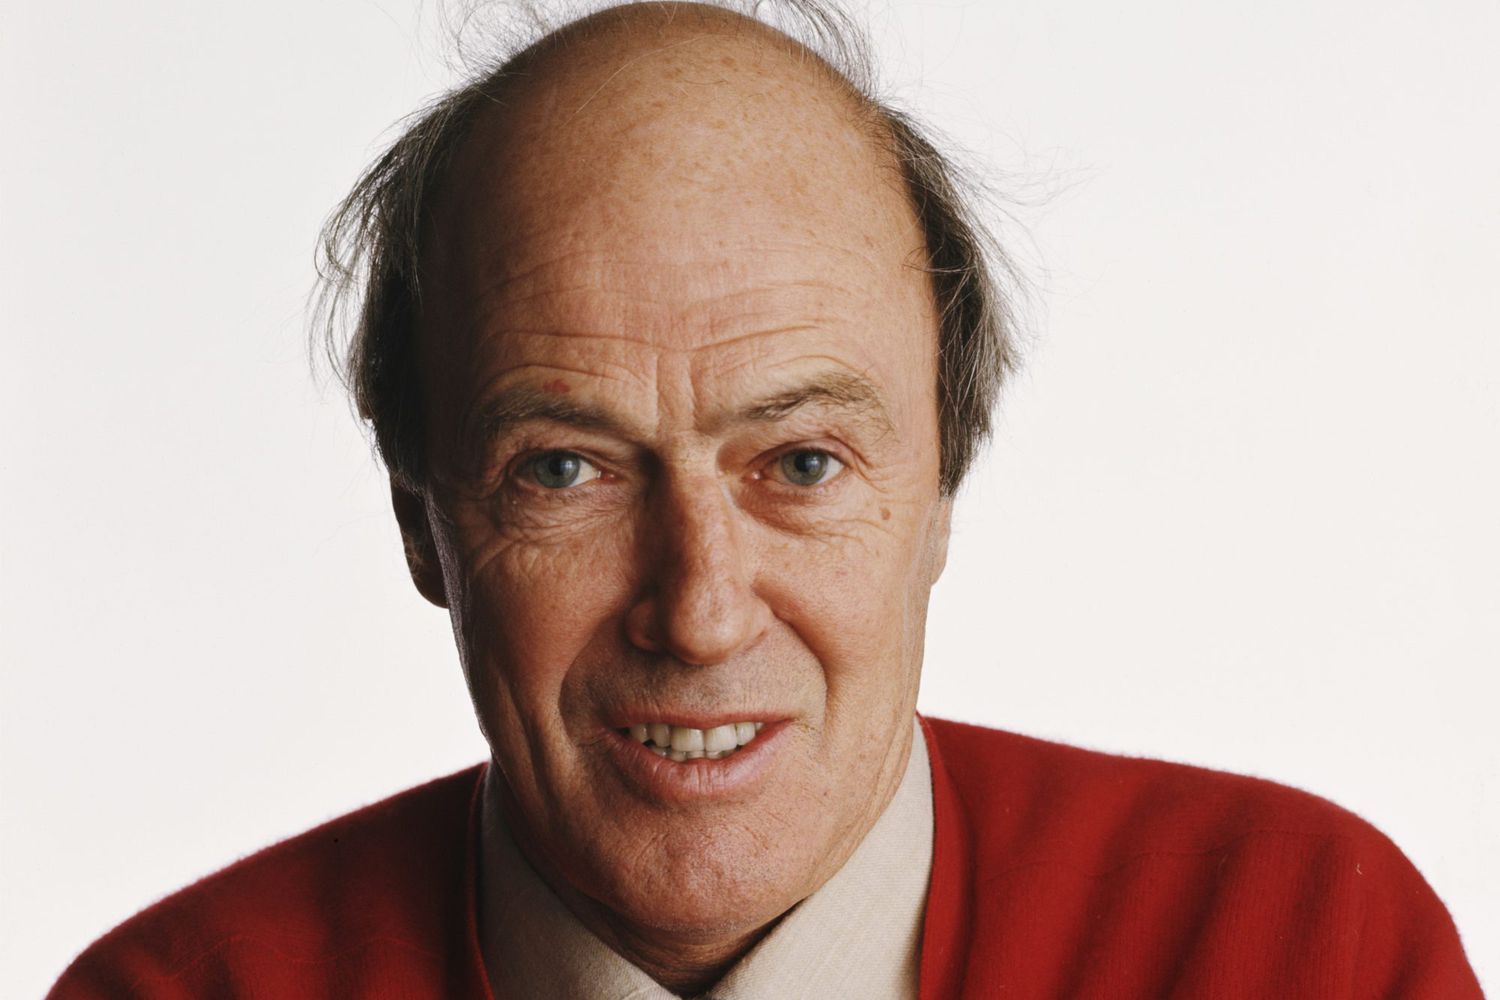 Novelist and screenwriter Roald Dahl, 1976. (Photo by Tony Evans/Getty Images)